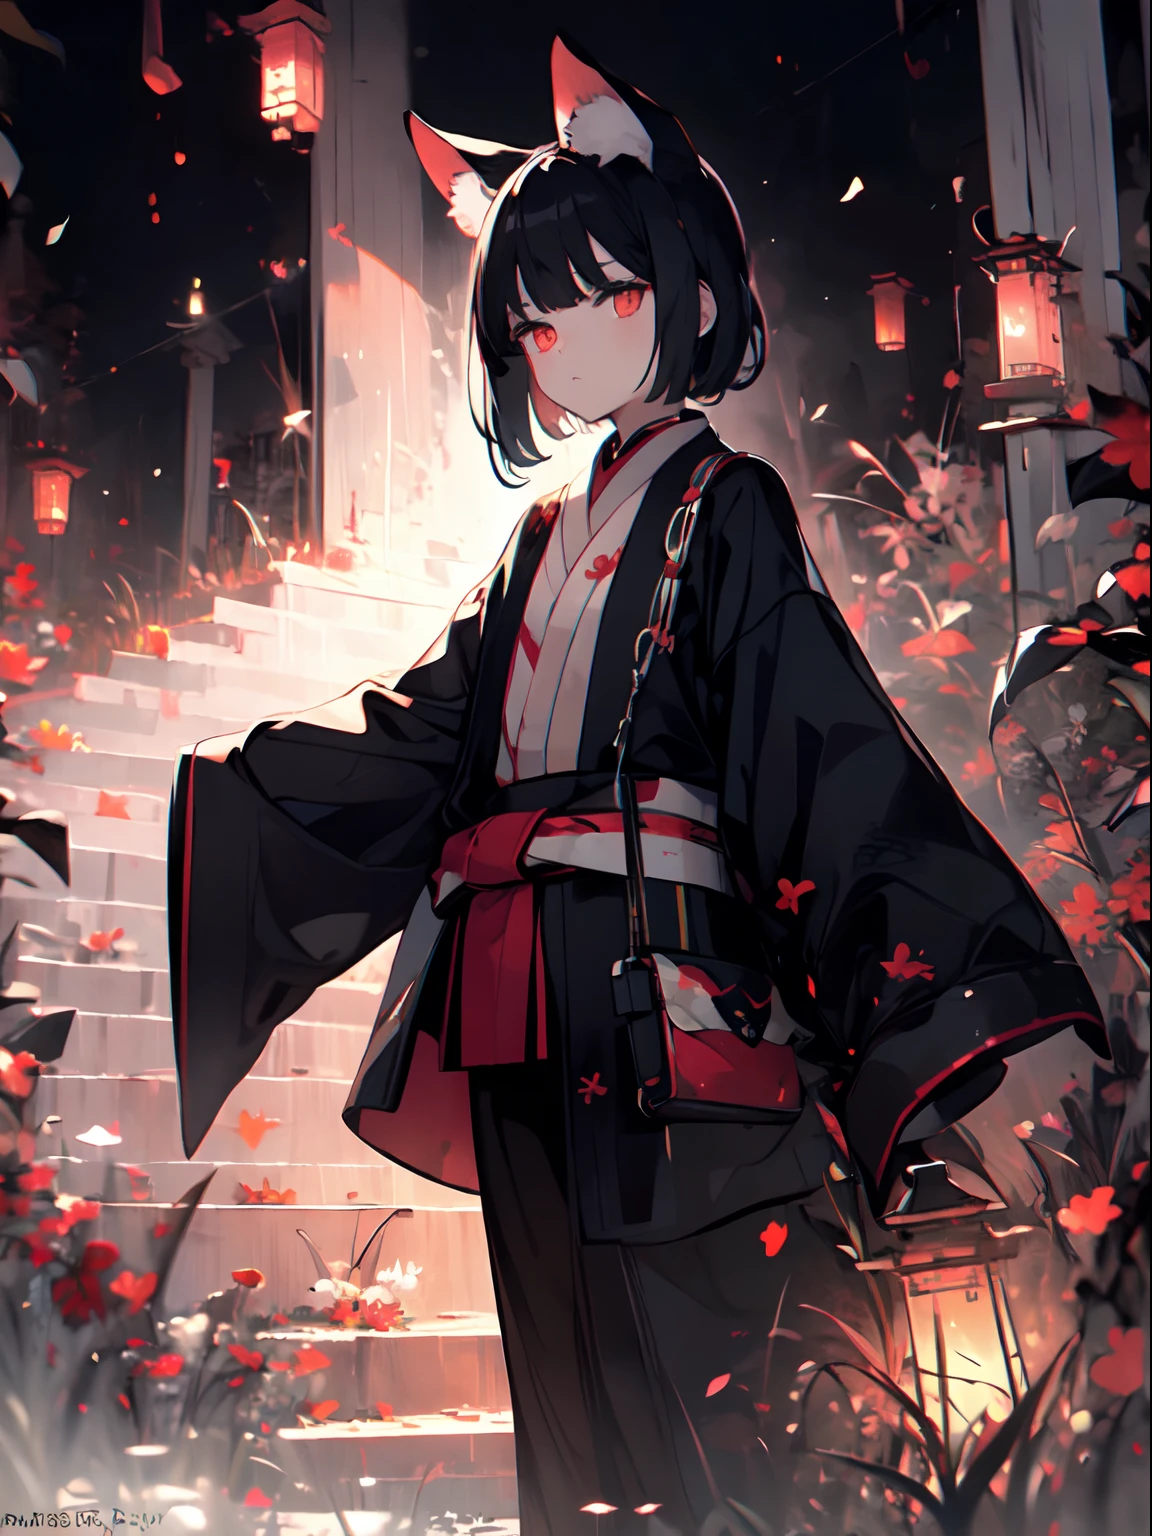 Small kitsune girl with black hair, red glowing eyes, blank expression, sleeves past fingers, backlight, mesmerizing and eerie